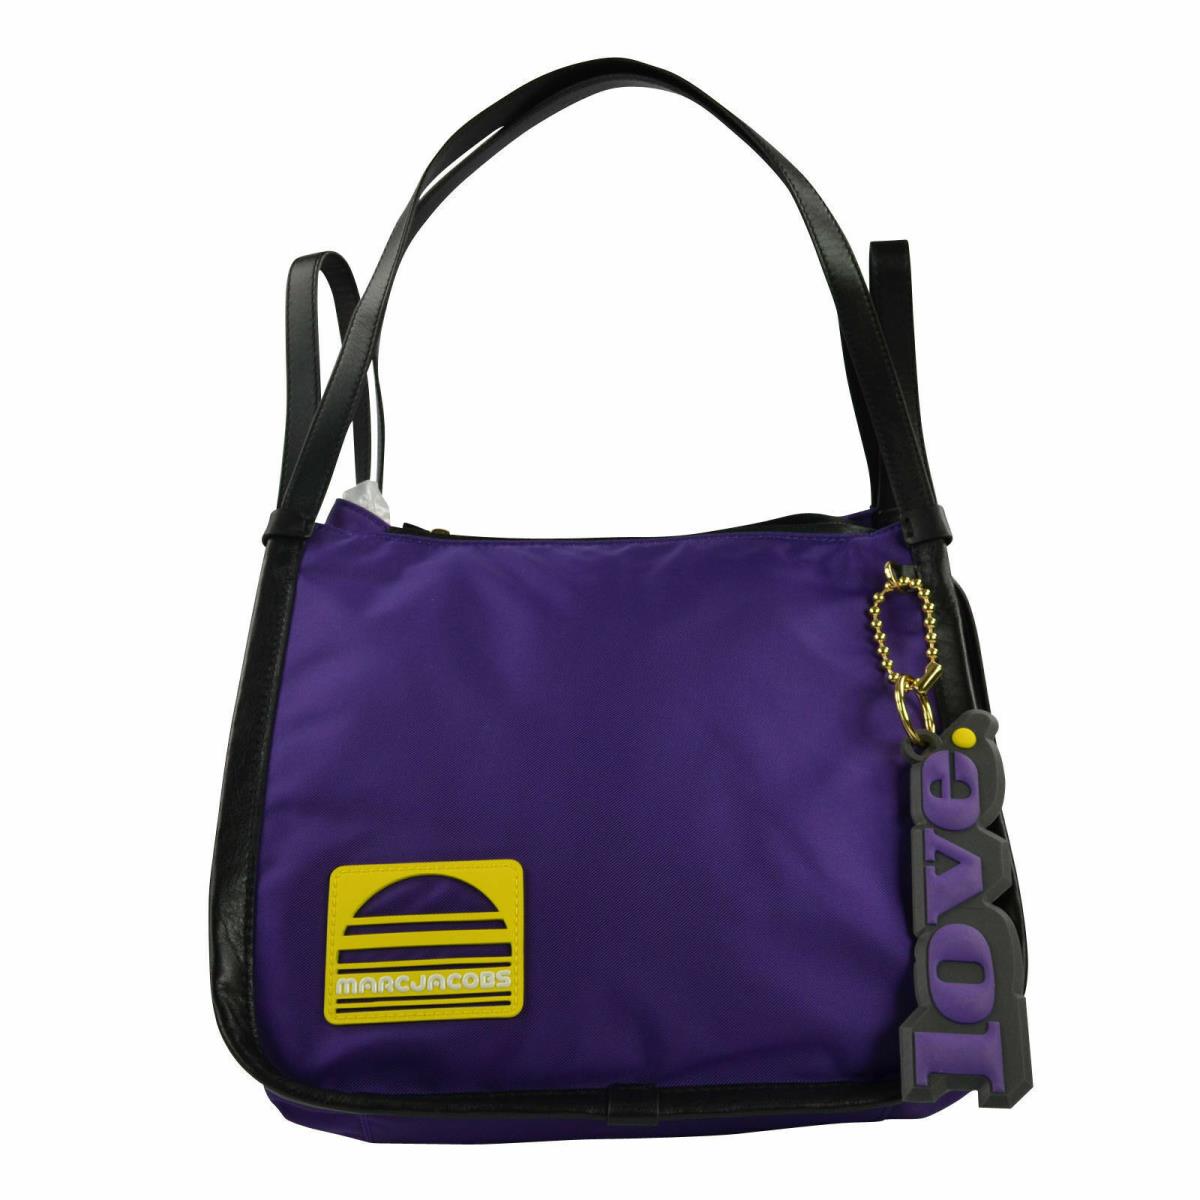 Marc Jacobs Women`s Sport Nylon/leather Tote Love Key Chain Eggplant - Exterior: , Lining: Black, Hardware: Gold